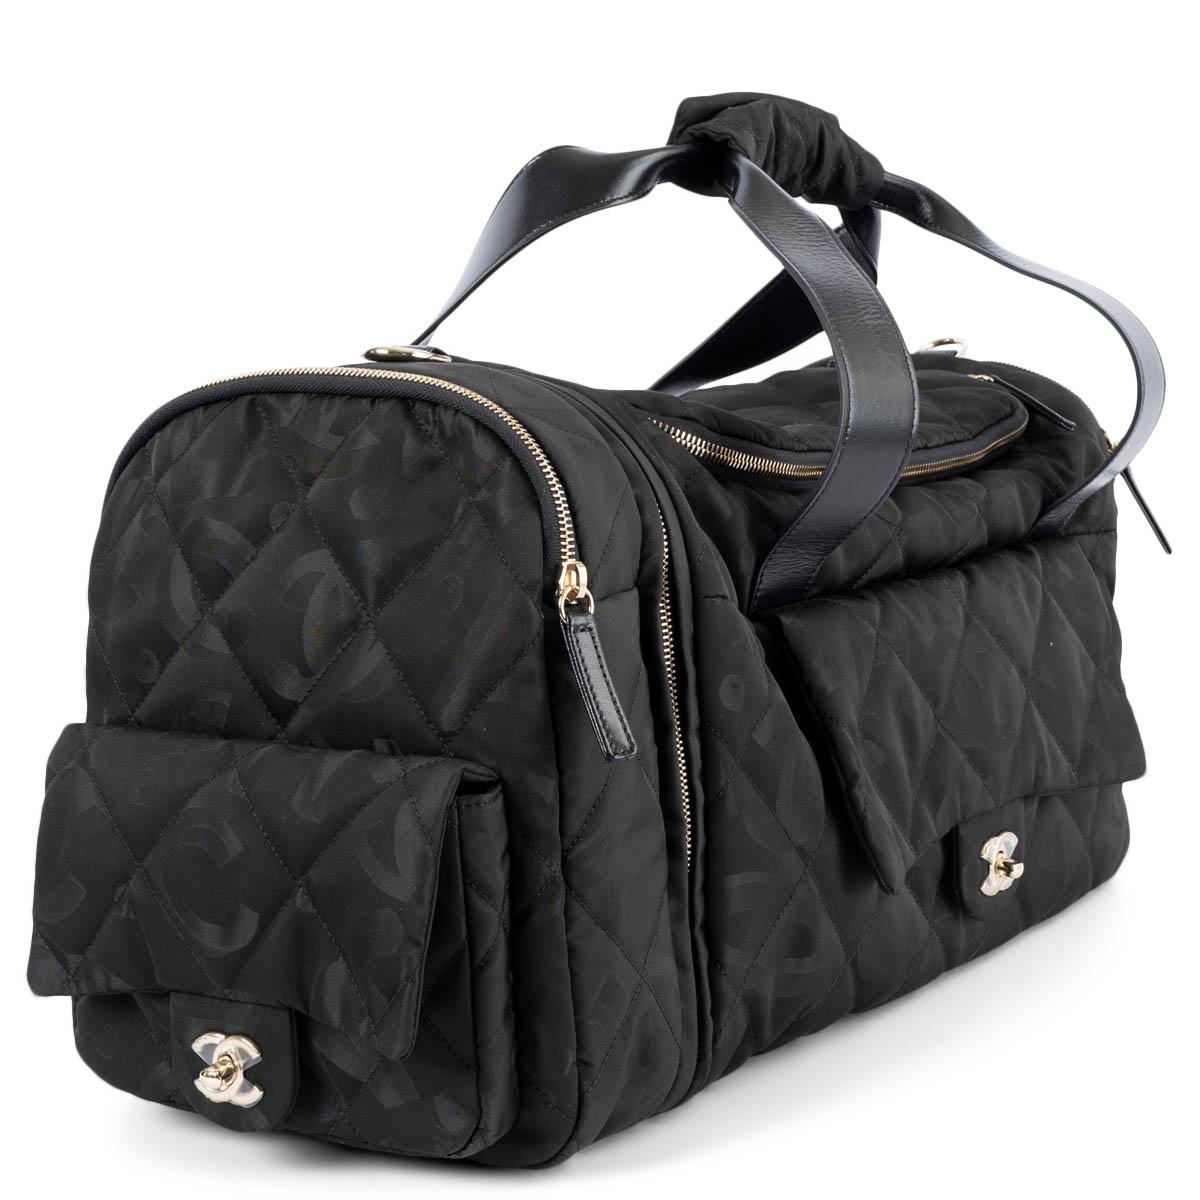 100% authentic Chanel  Two-in-One duffle bag and backpack in black logo nylon with black calfskin trim. Opens with a zipper on top and is lined in tonal fabric with a zipper pocket against the back. The design features a CC turn-lock front pocket, a